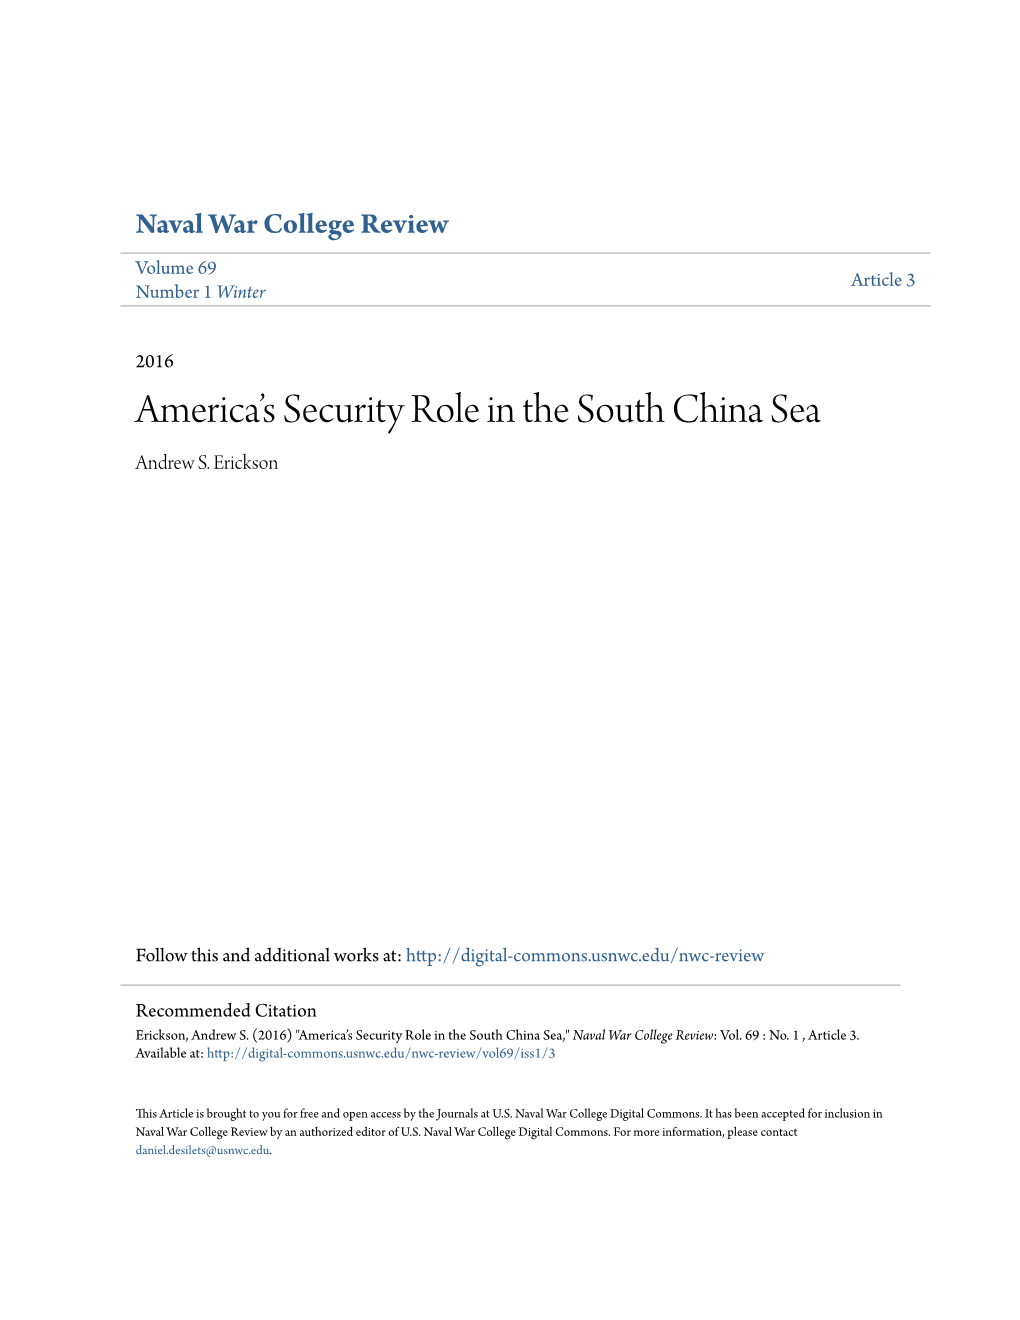 America's Security Role in the South China